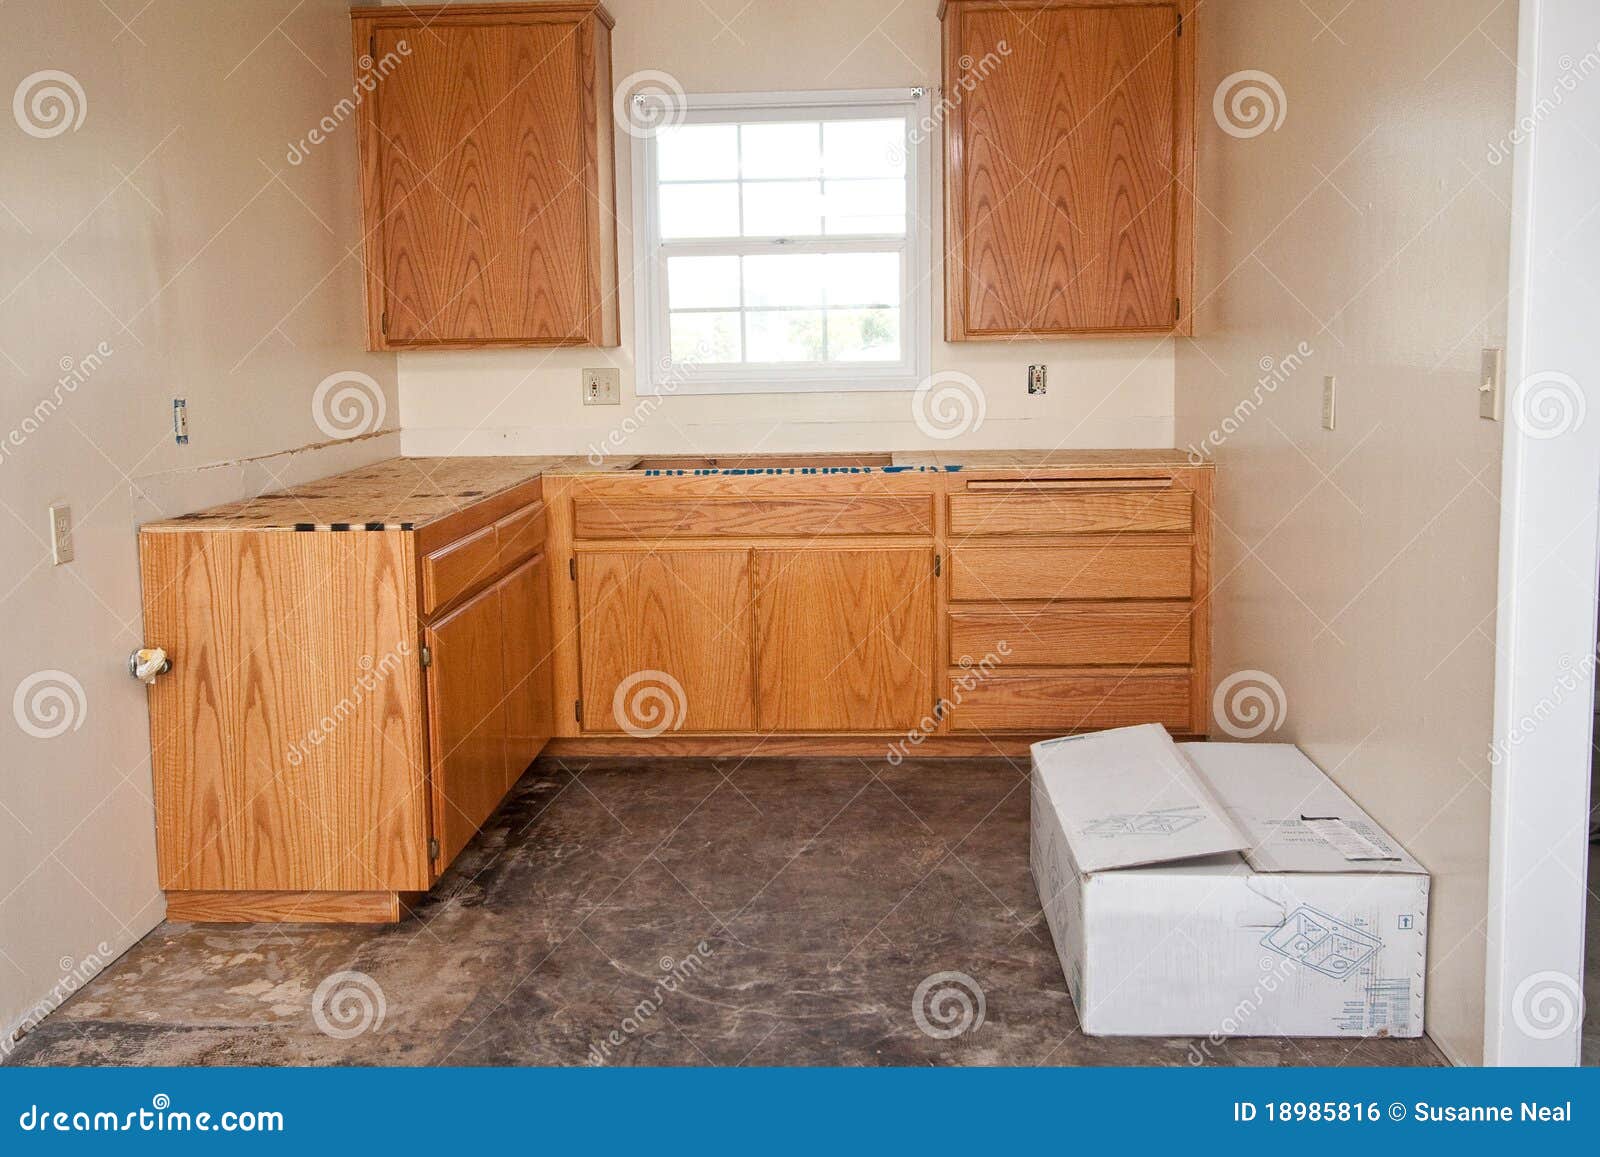 Kitchen Cabinets Without Countertop Stock Photo Image Of